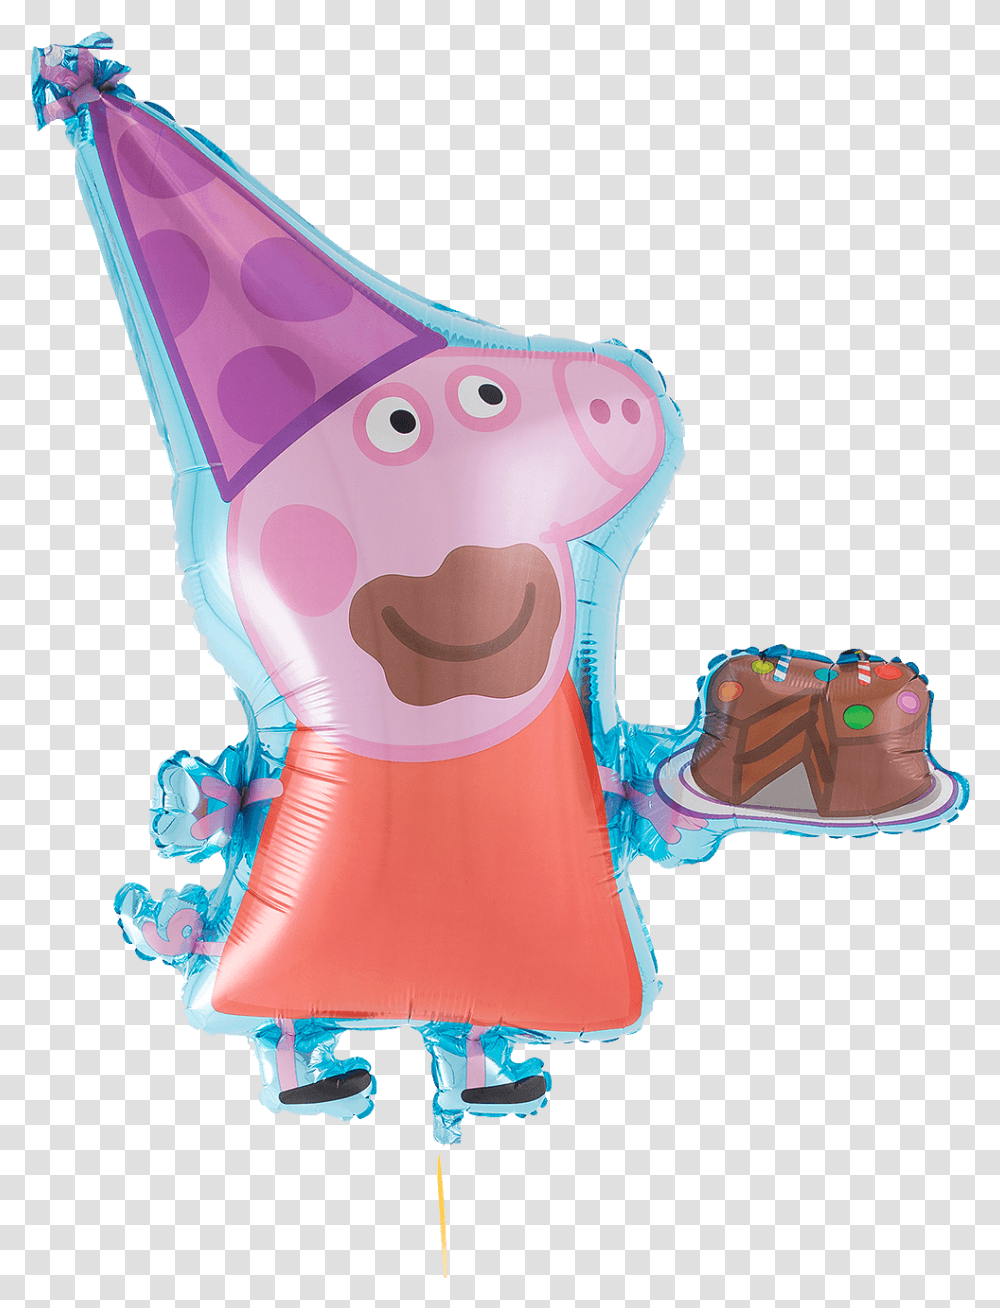 Peppa Pig Cake Supershape Balloon Birthday Peppa Pig, Clothing, Apparel, Party Hat, Sweets Transparent Png